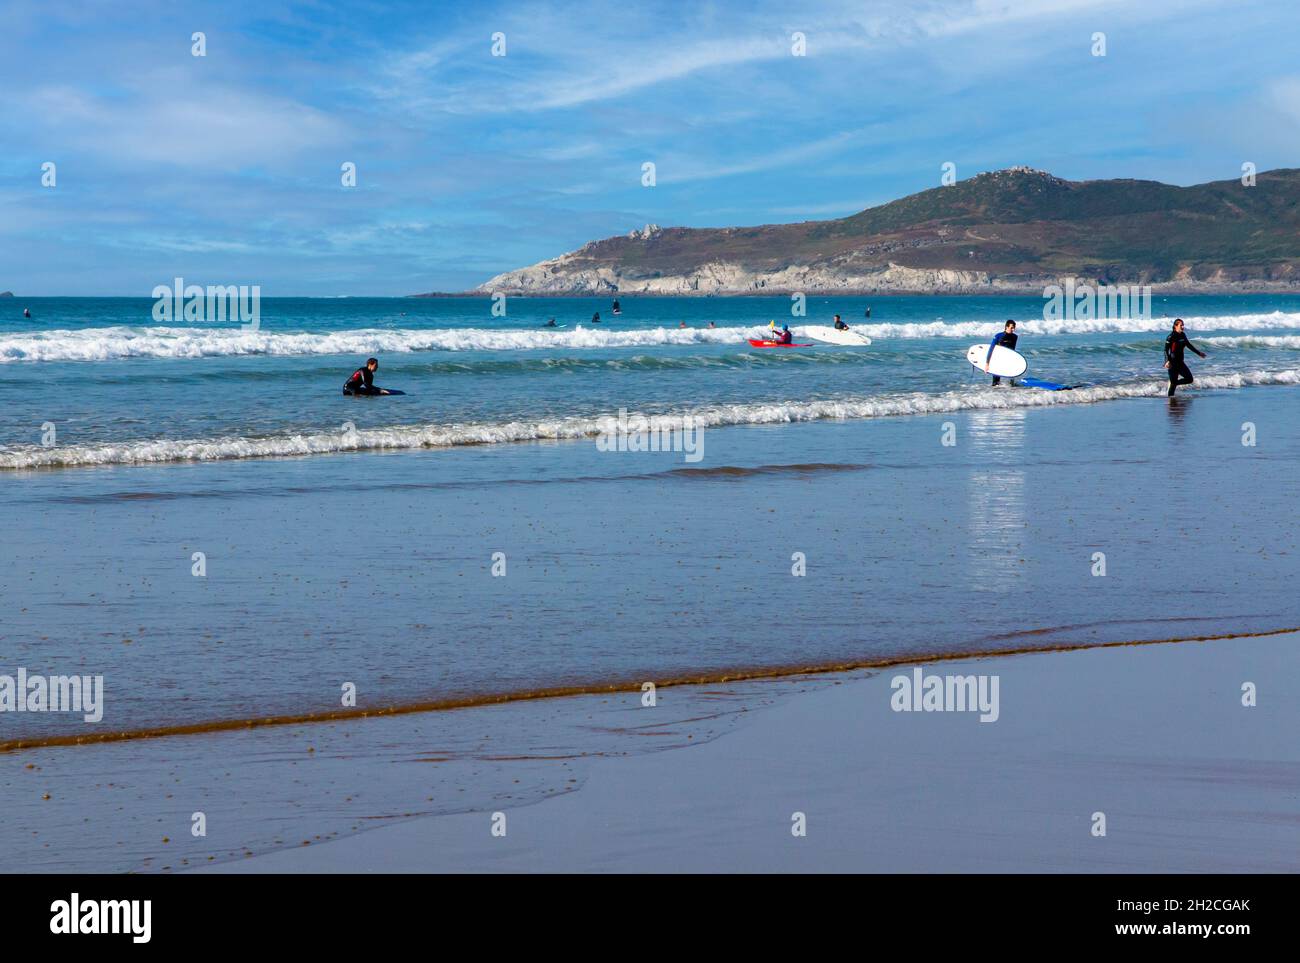 Surfers on the sandy beach at Woolacombe on the North Devon coast England UK close to the South West Coast Path. Stock Photo